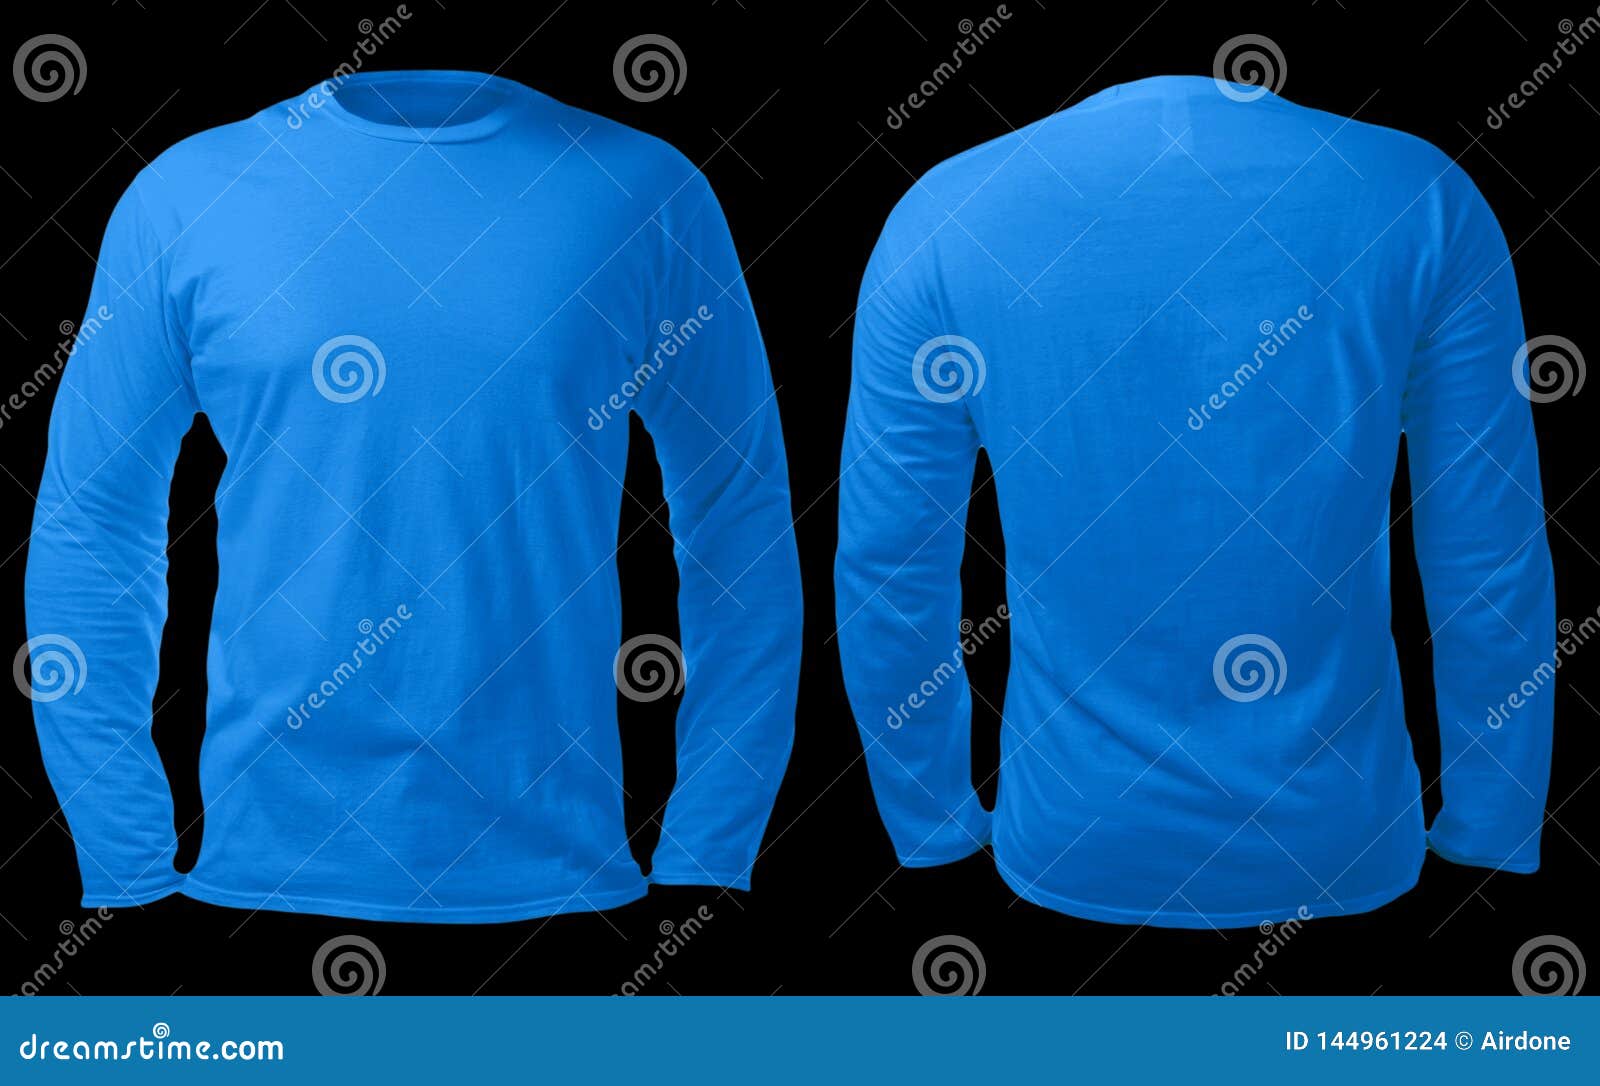 Download Blue Long Sleeved Shirt Design Template Stock Photo Image Of Outfit Mockup 144961224